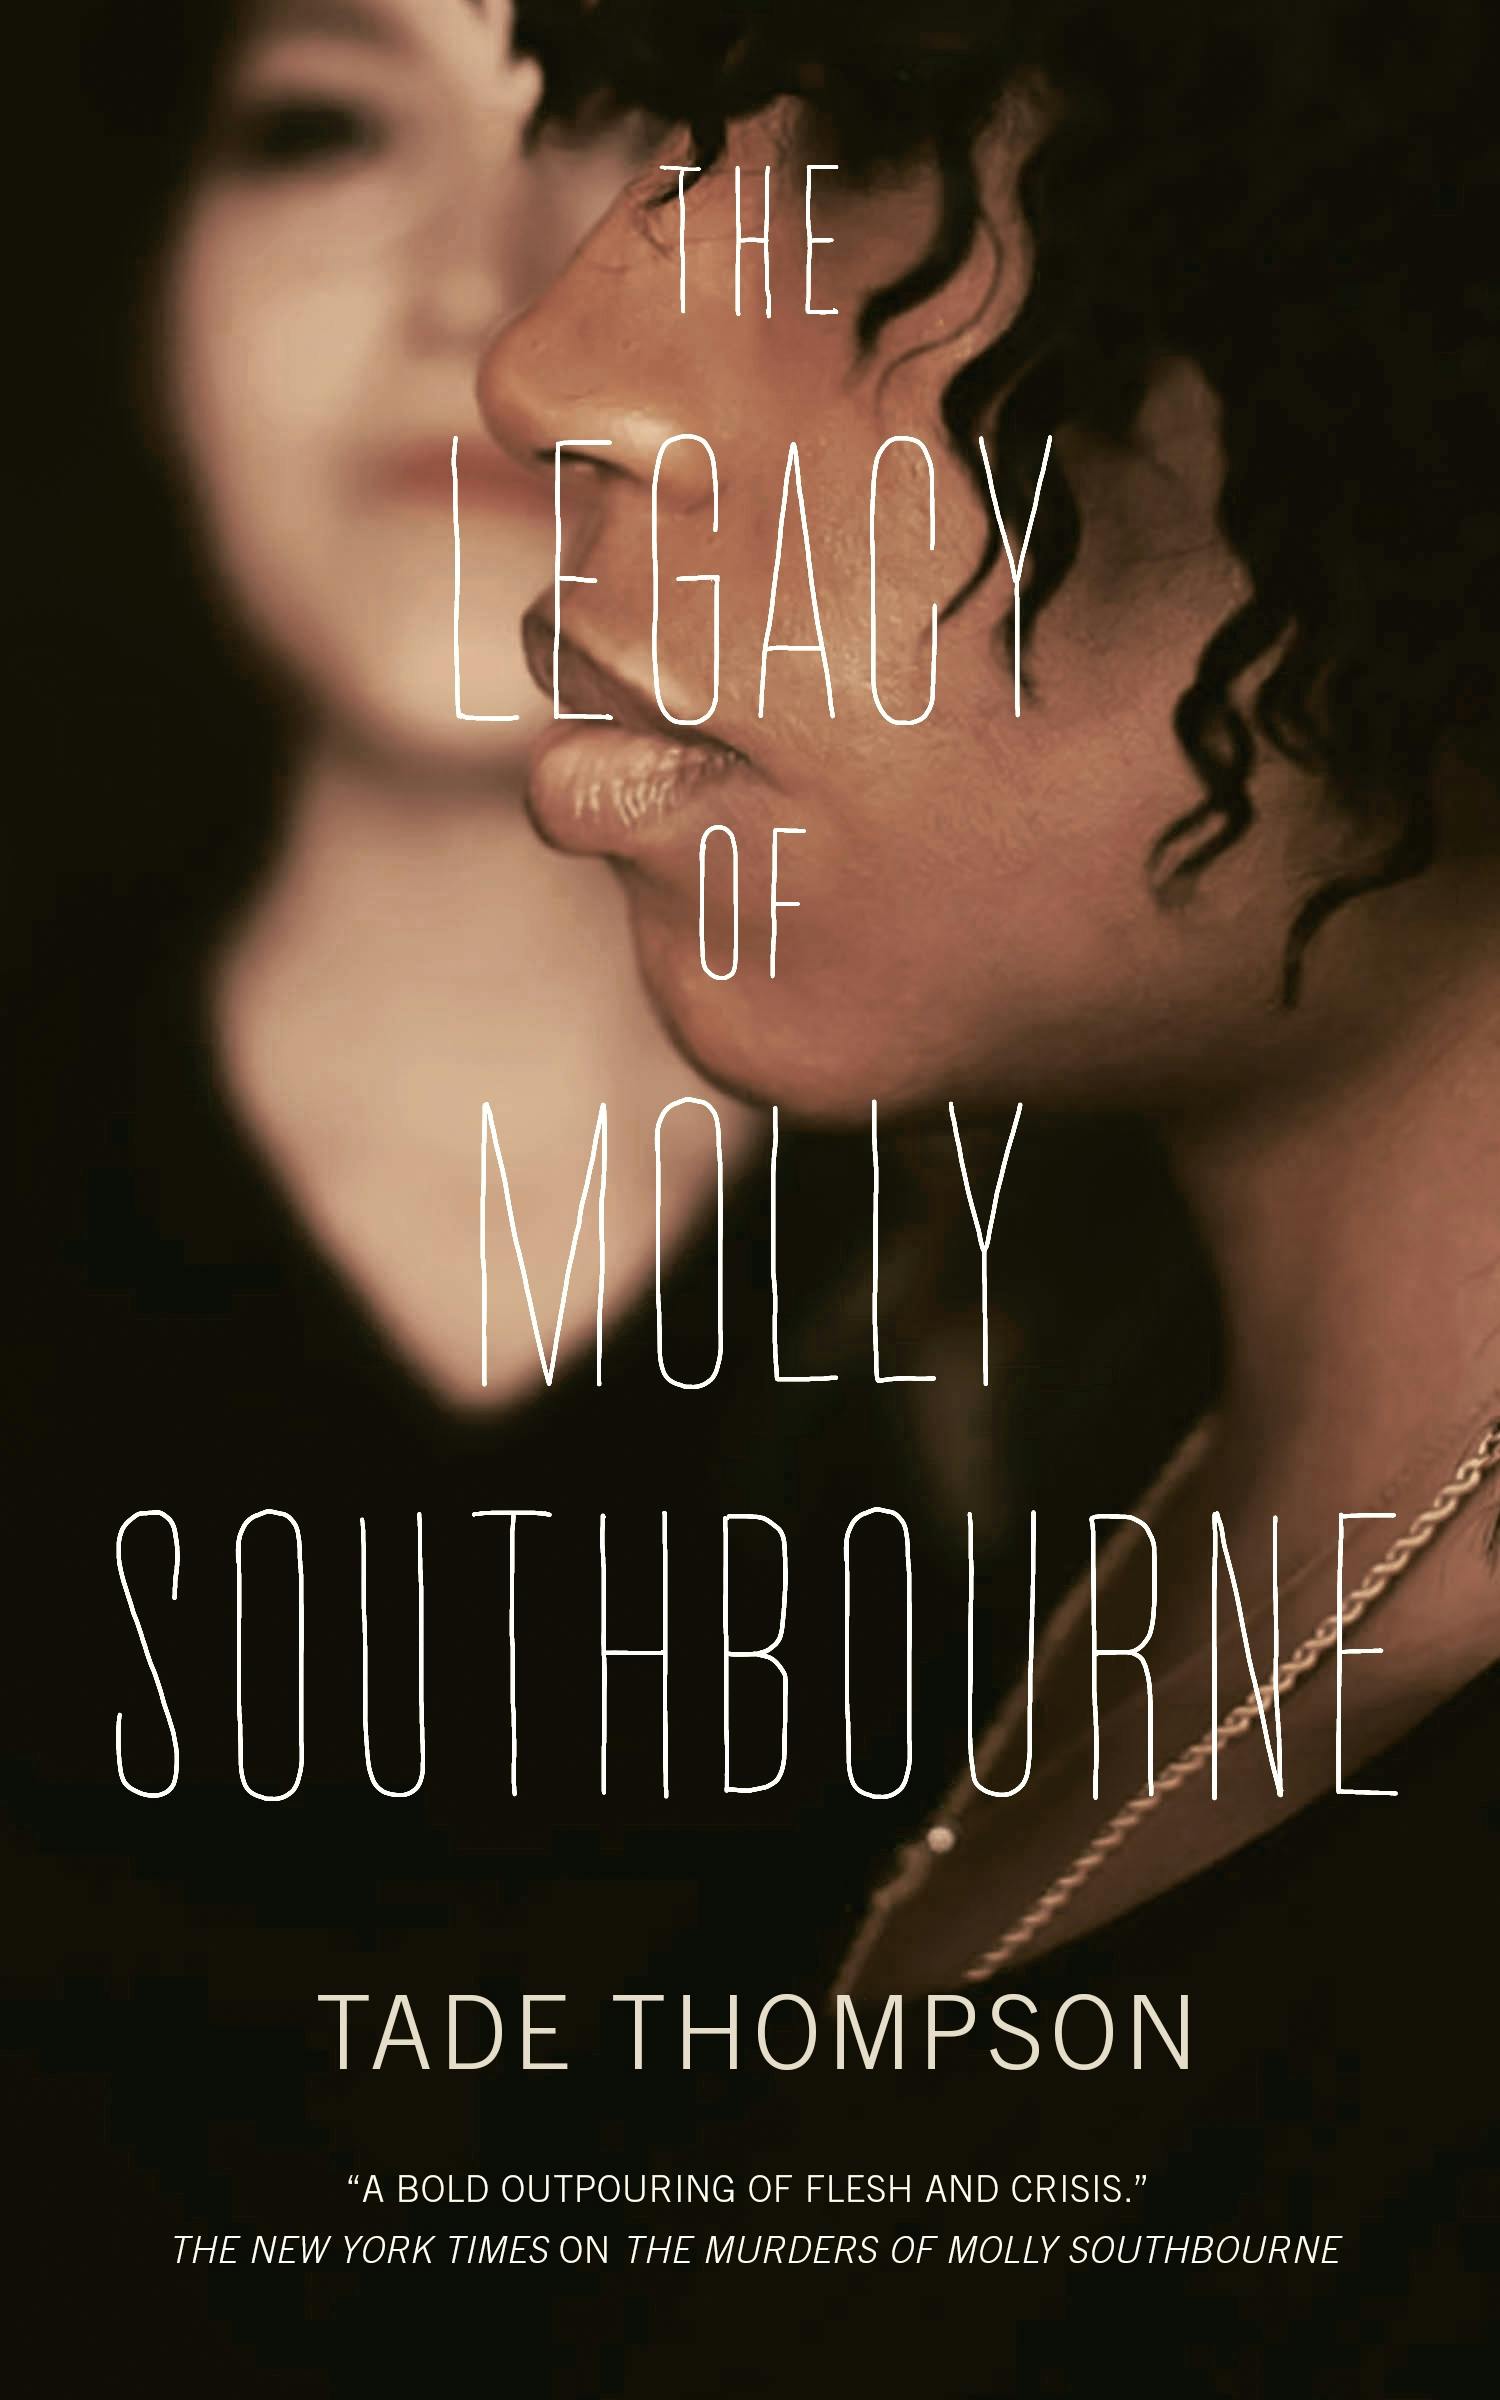 The Legacy of Molly Southbourne (EBook, 2022, Tor.com)